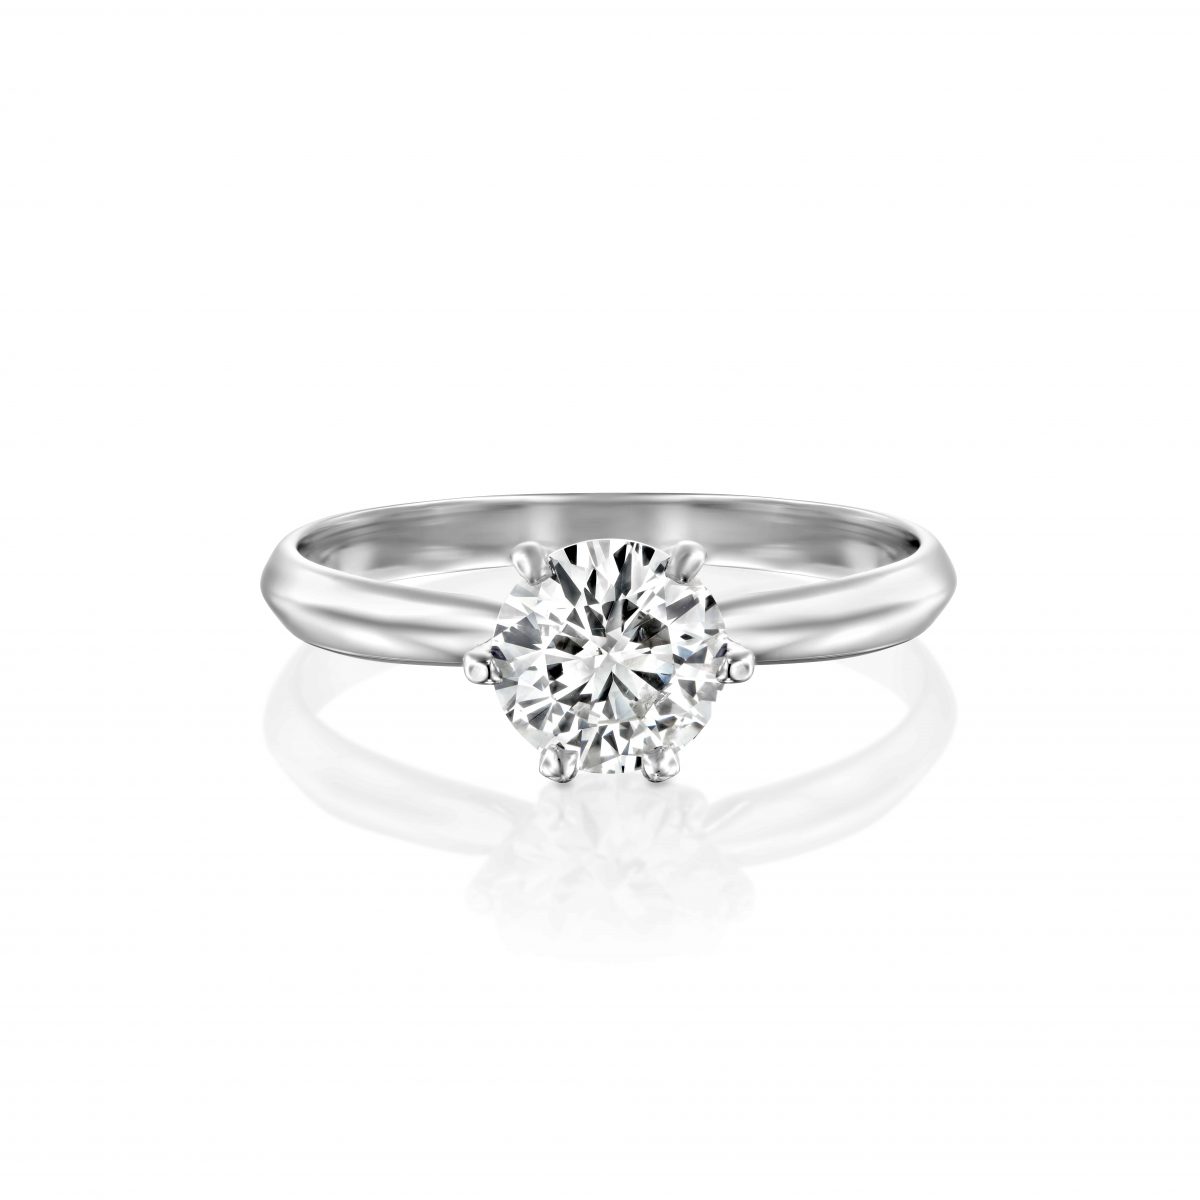 "Claire" - White Gold Lab Grown Diamond Engagement Ring 0.75ct. - laying